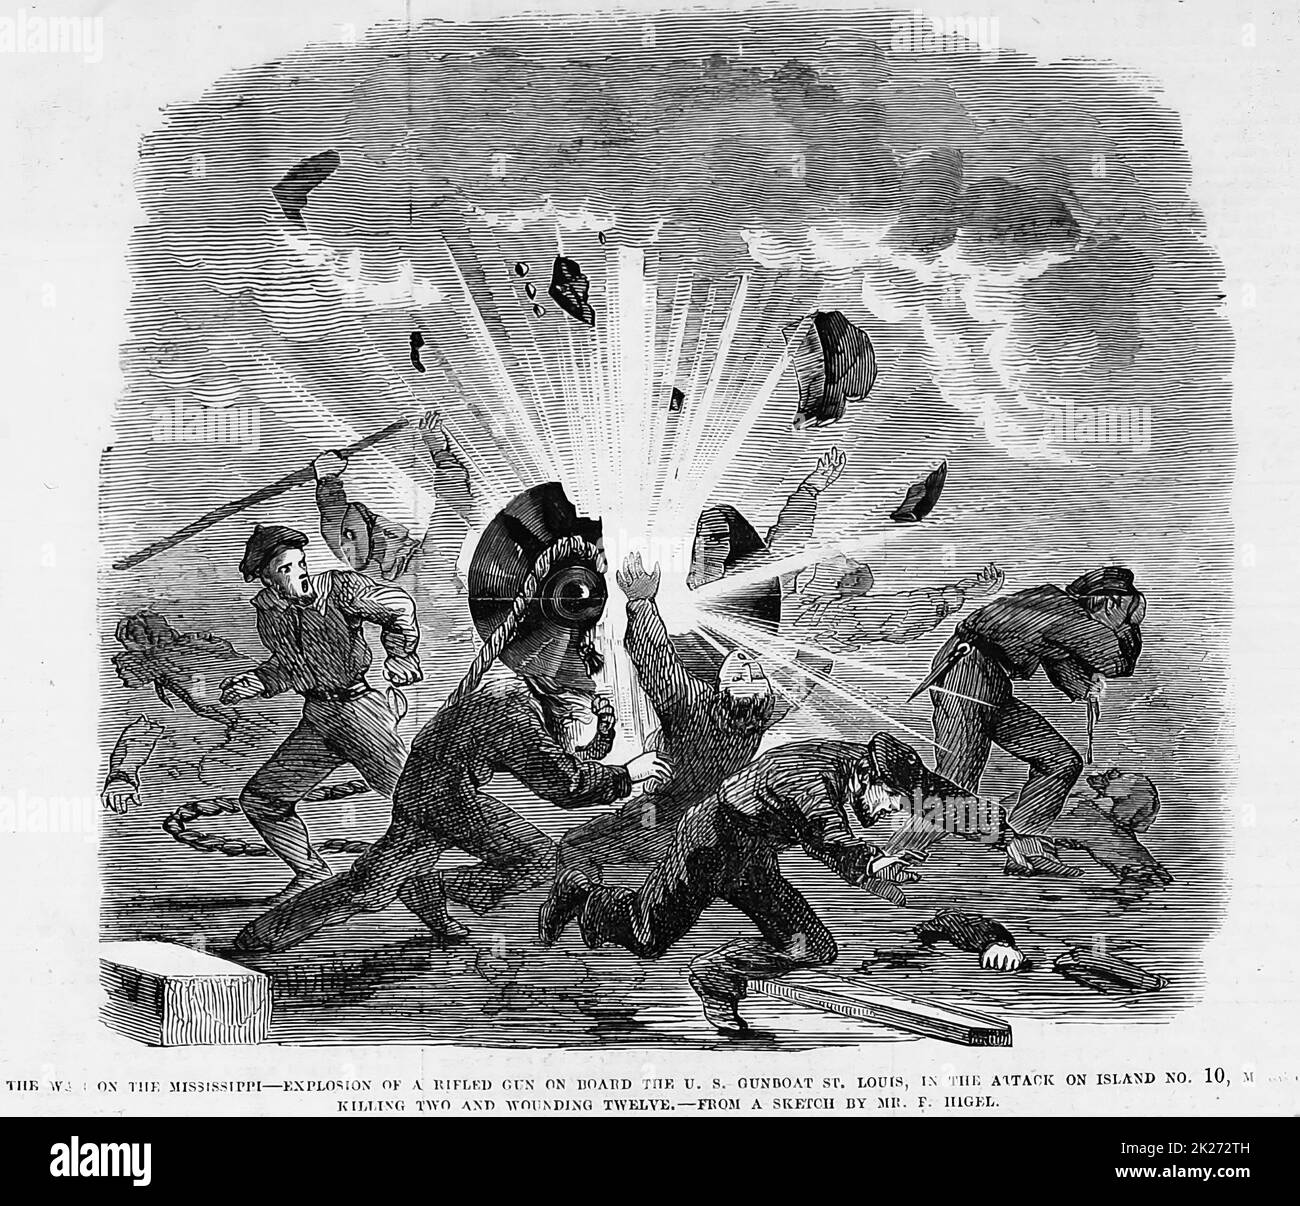 The War on the Mississippi - Explosion of a rifled gun on board the U. S. gunboat St. Louis, in the attack on Island No. 10, March 17th, 1862, killing two and wounding twelve. 19th century American Civil War illustration from Frank Leslie's Illustrated Newspaper Stock Photo